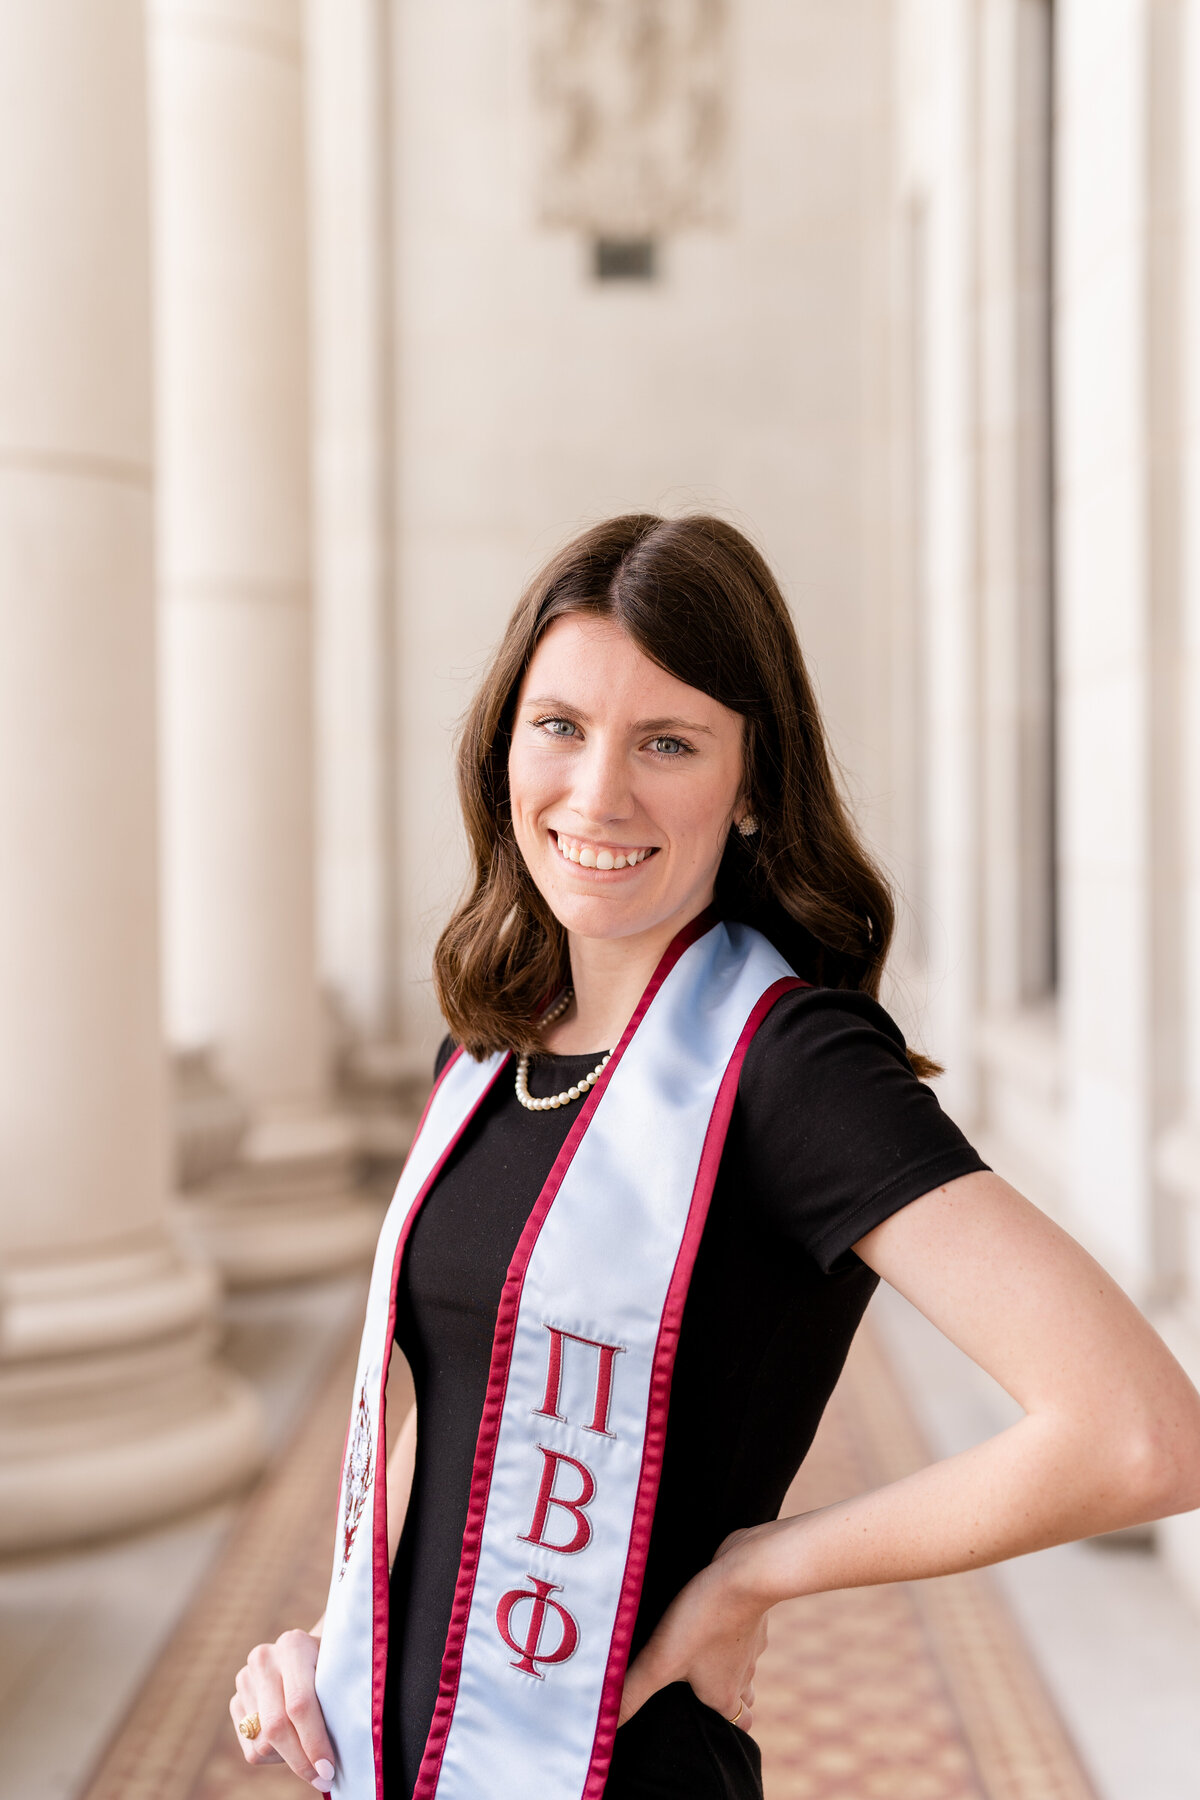 Texas A&M senior girl smiling with hand on hip wearing Pi Phi stole and black dress in the columns of the Administration Building